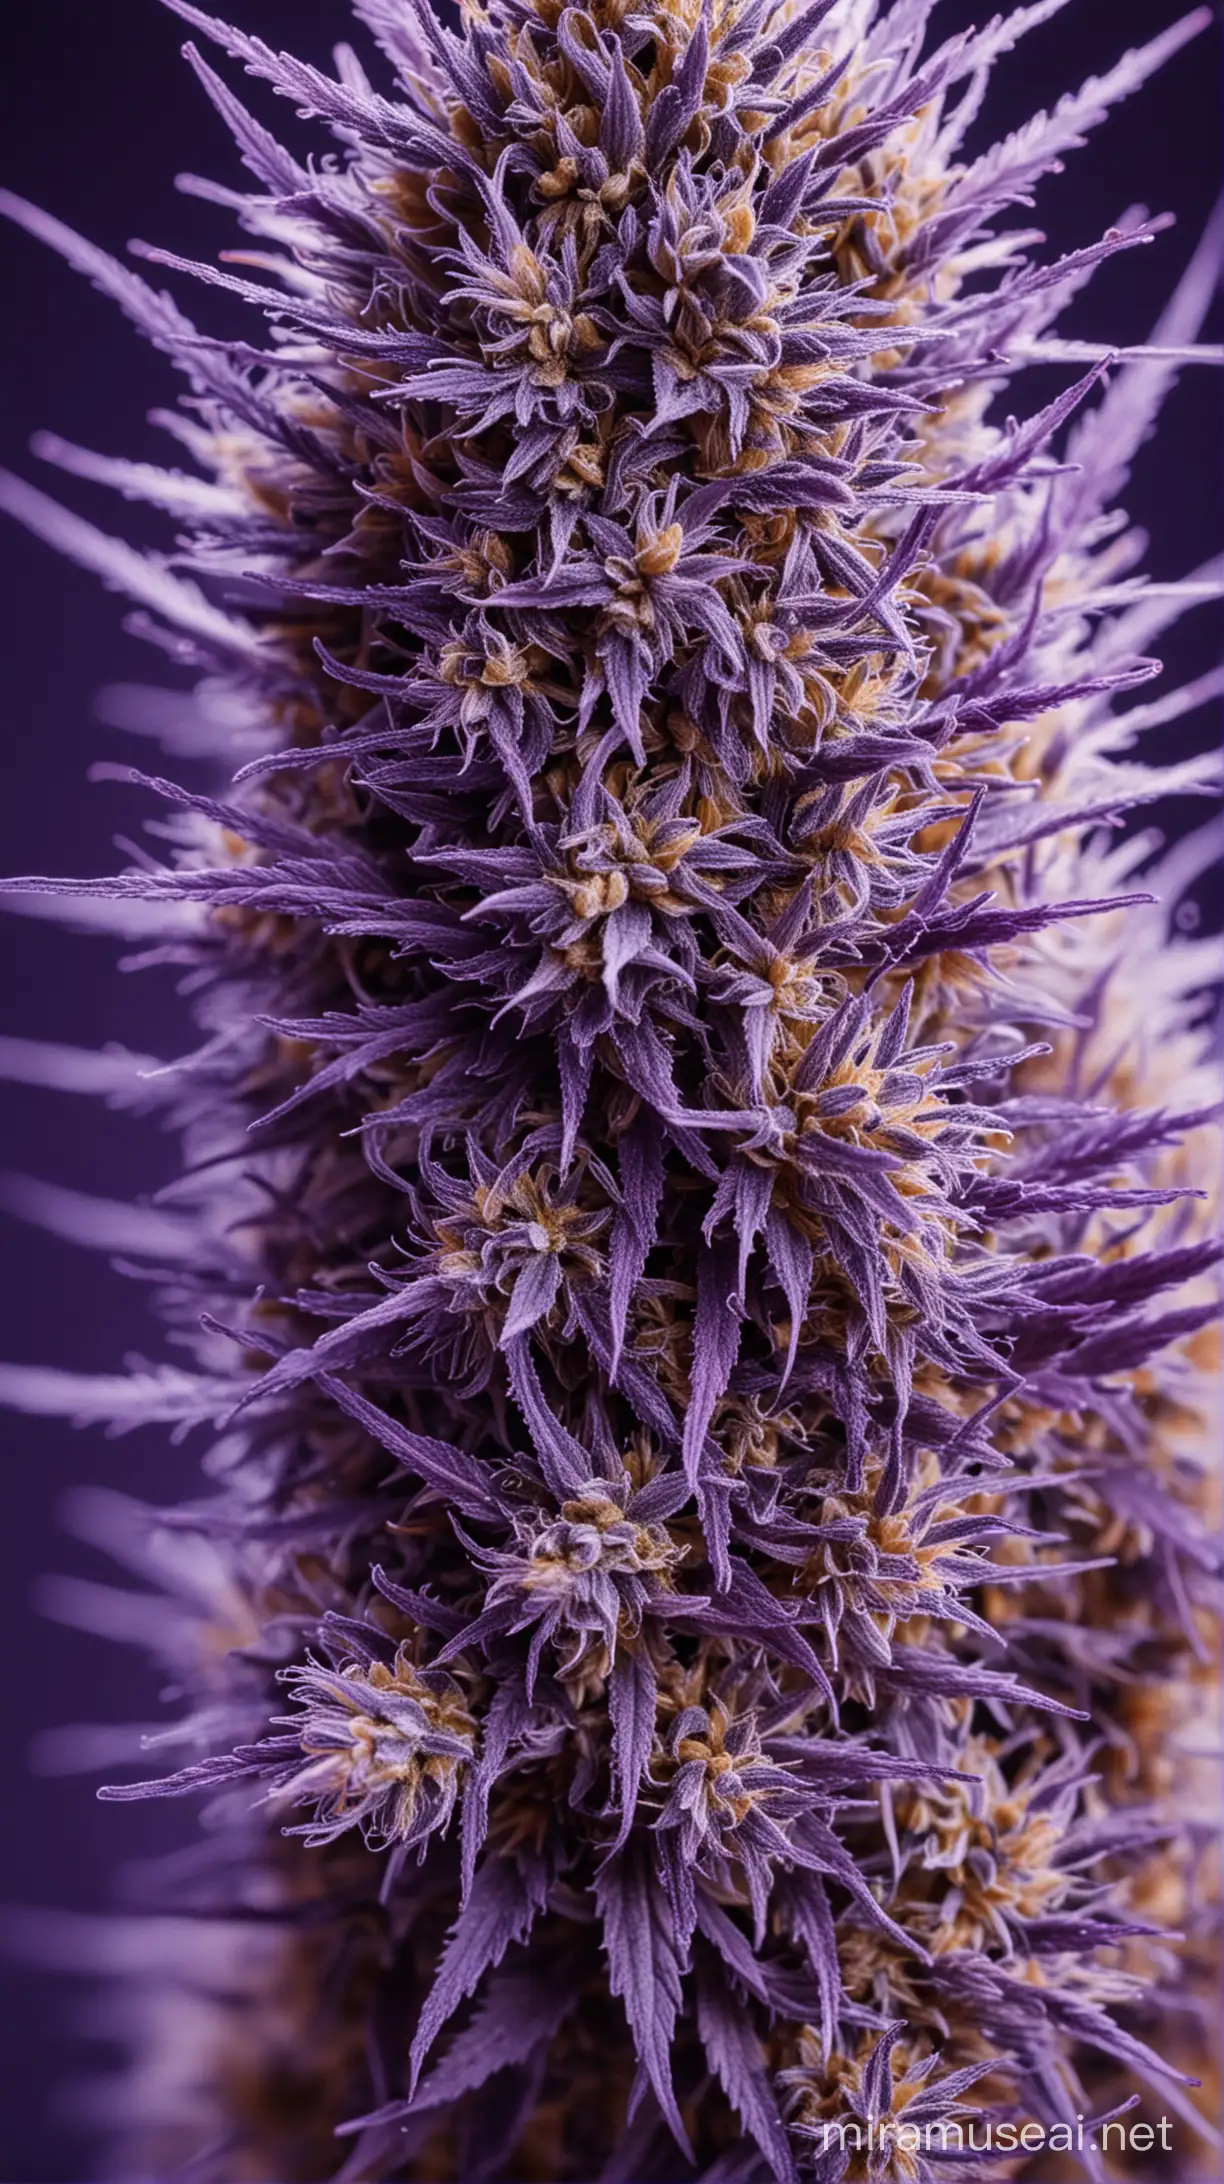 a breathtaking 1000x zoomed in close up photo of a resinous cannabis with purple hues